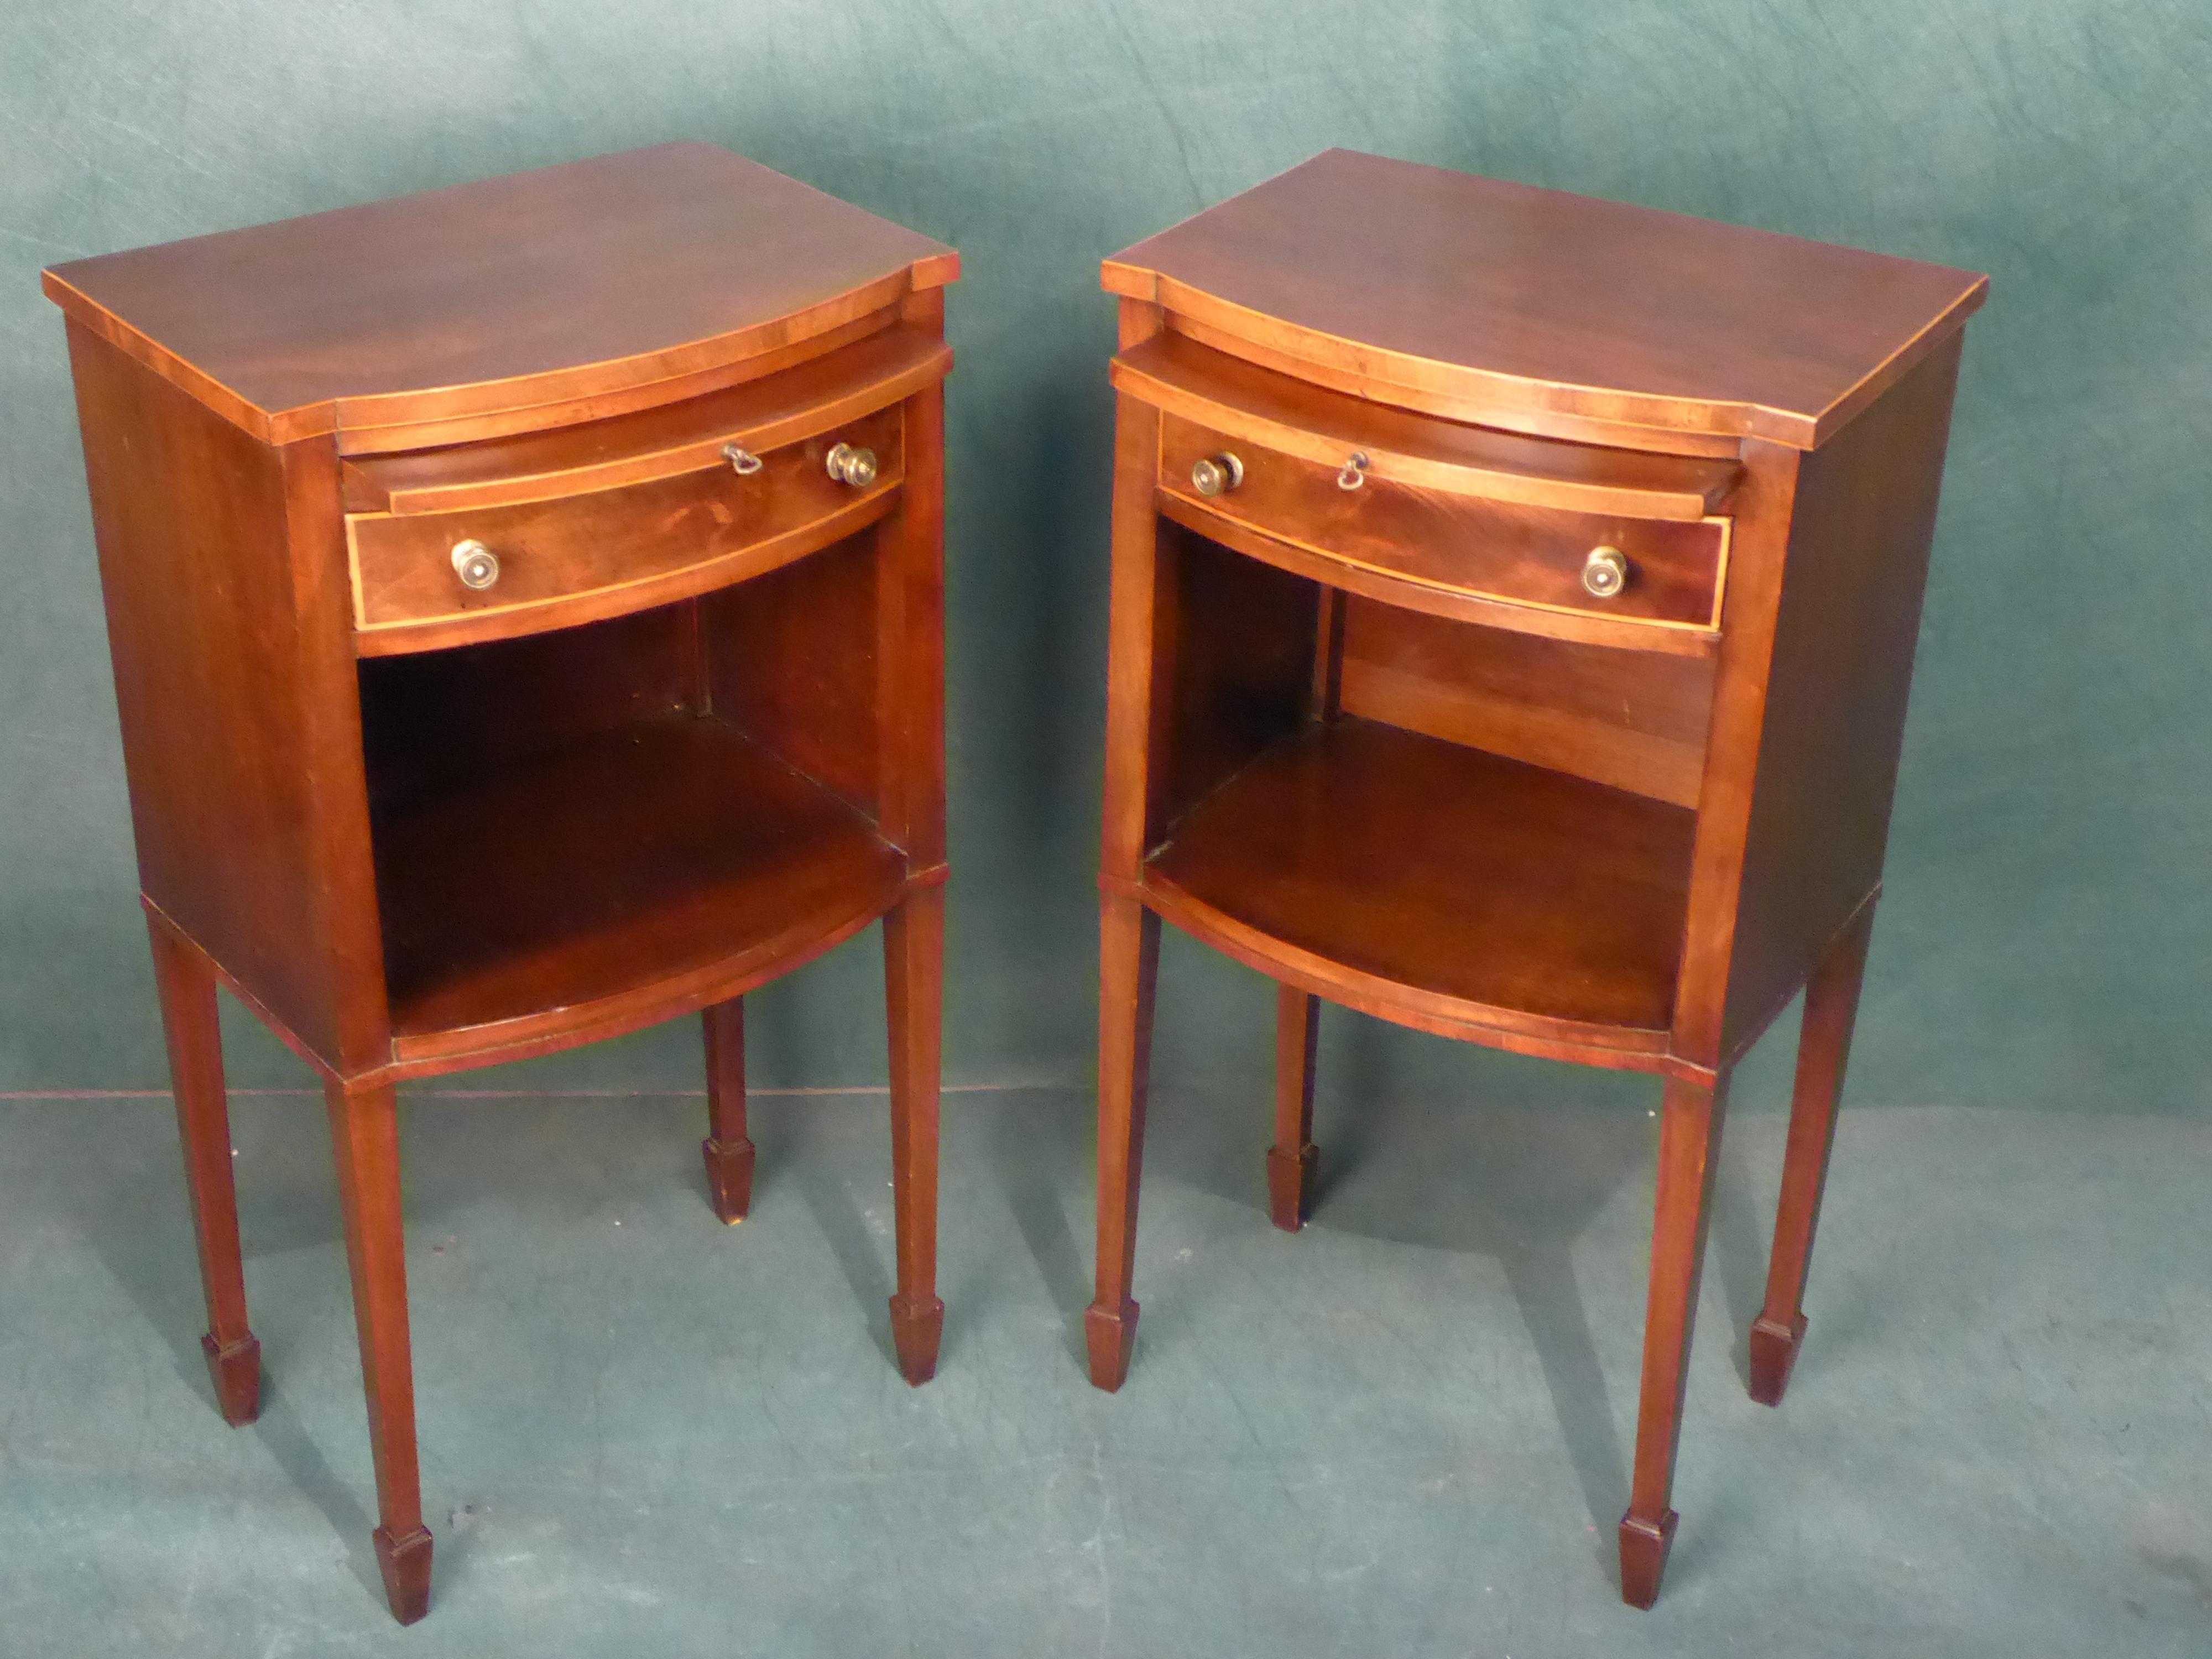 Polished Good Pair of Bow Front Edwardian Bedside Cabinets in Mahogany with One Drawer  For Sale